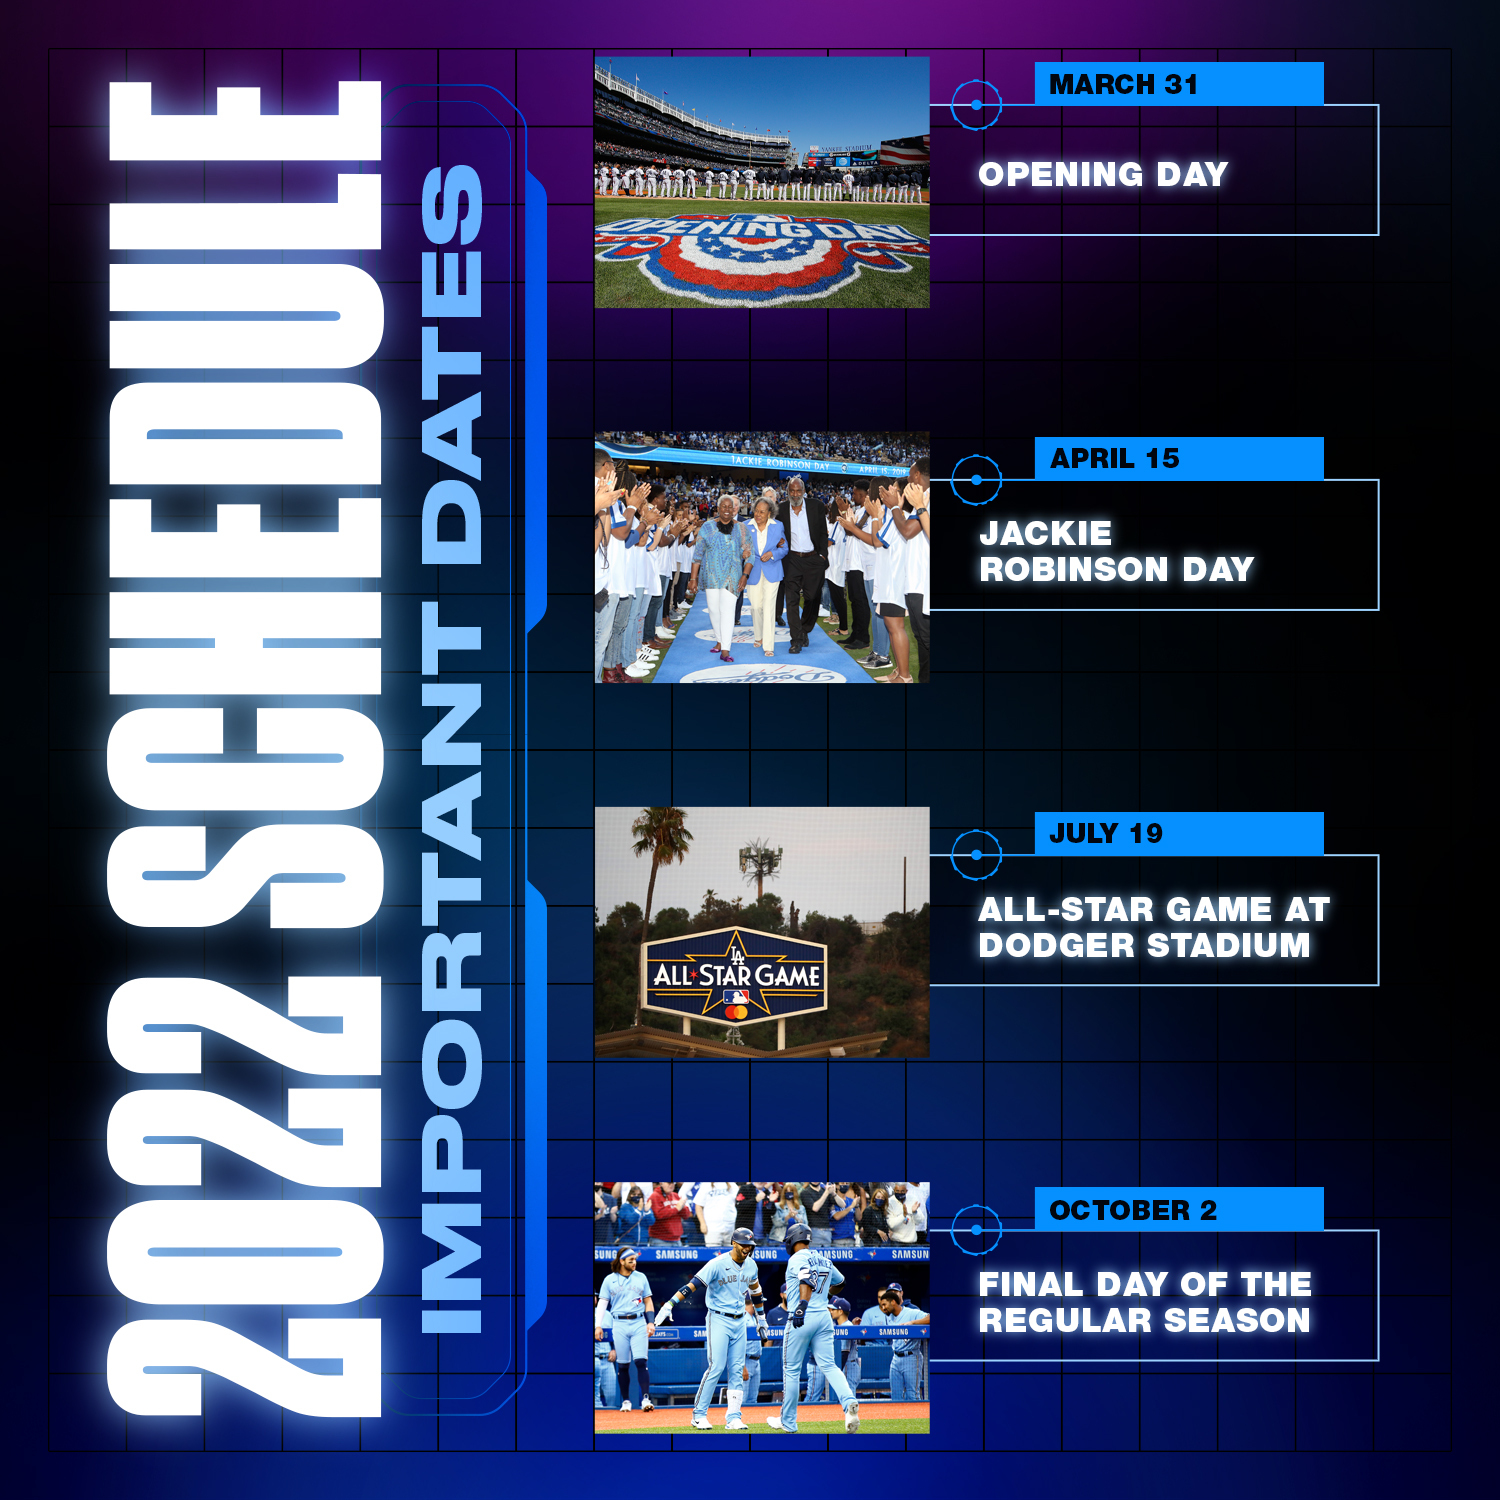 Mlb Schedule 2022 Mlb On Twitter: "The 2022 Schedule Is Out! Mark Your Calendar Accordingly.  ⬇️ Https://T.co/By19Zgwwbu" / Twitter